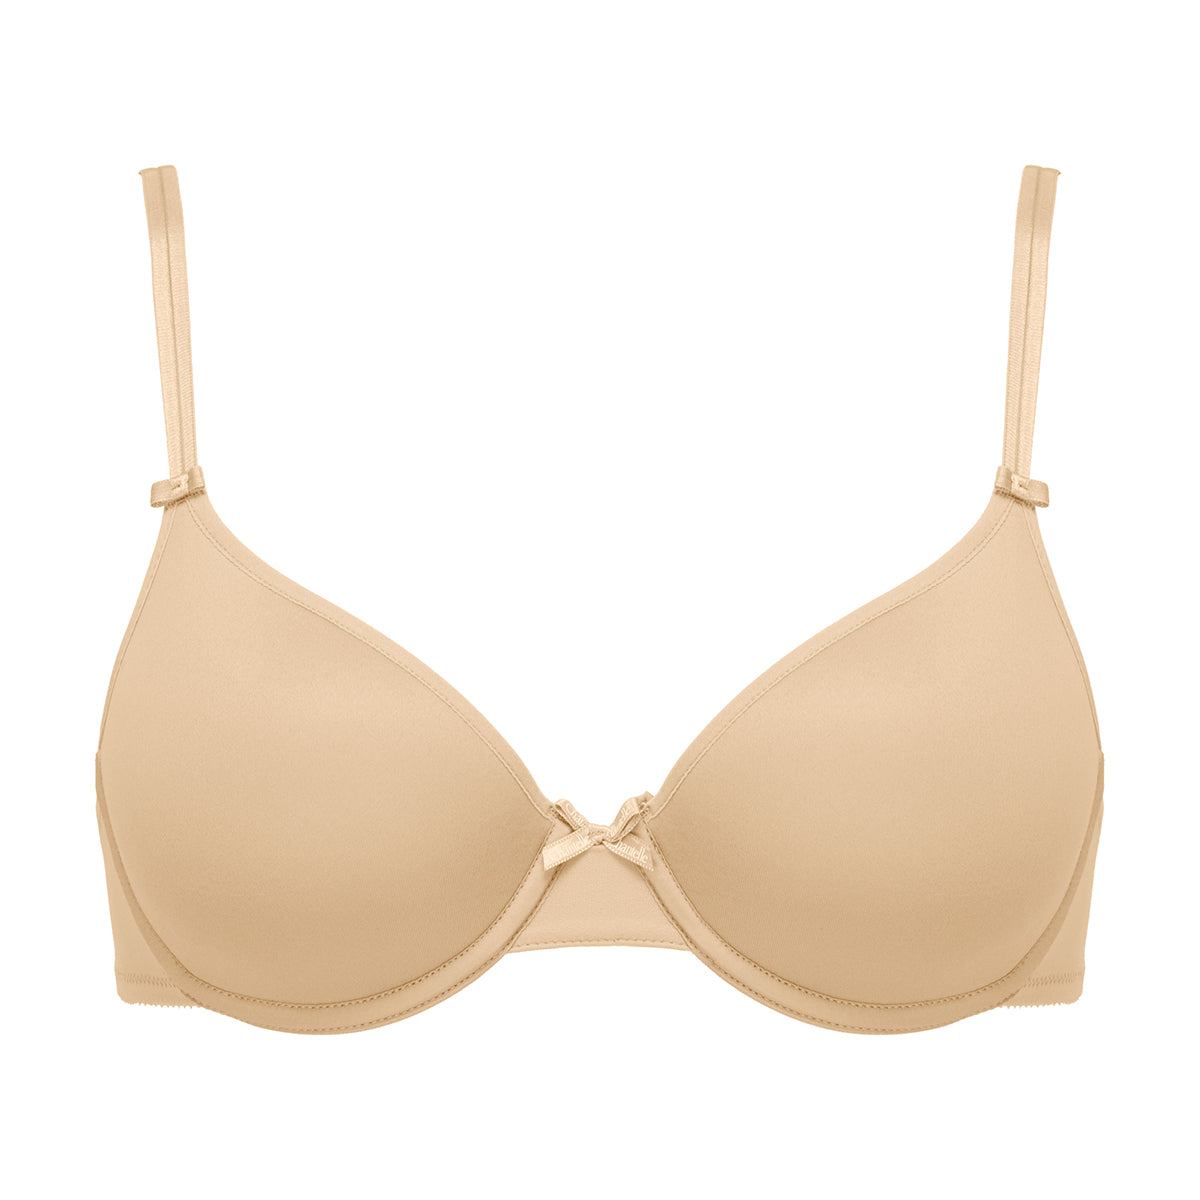 Chantelle Bare Essential Molded Balcony Cup Bra